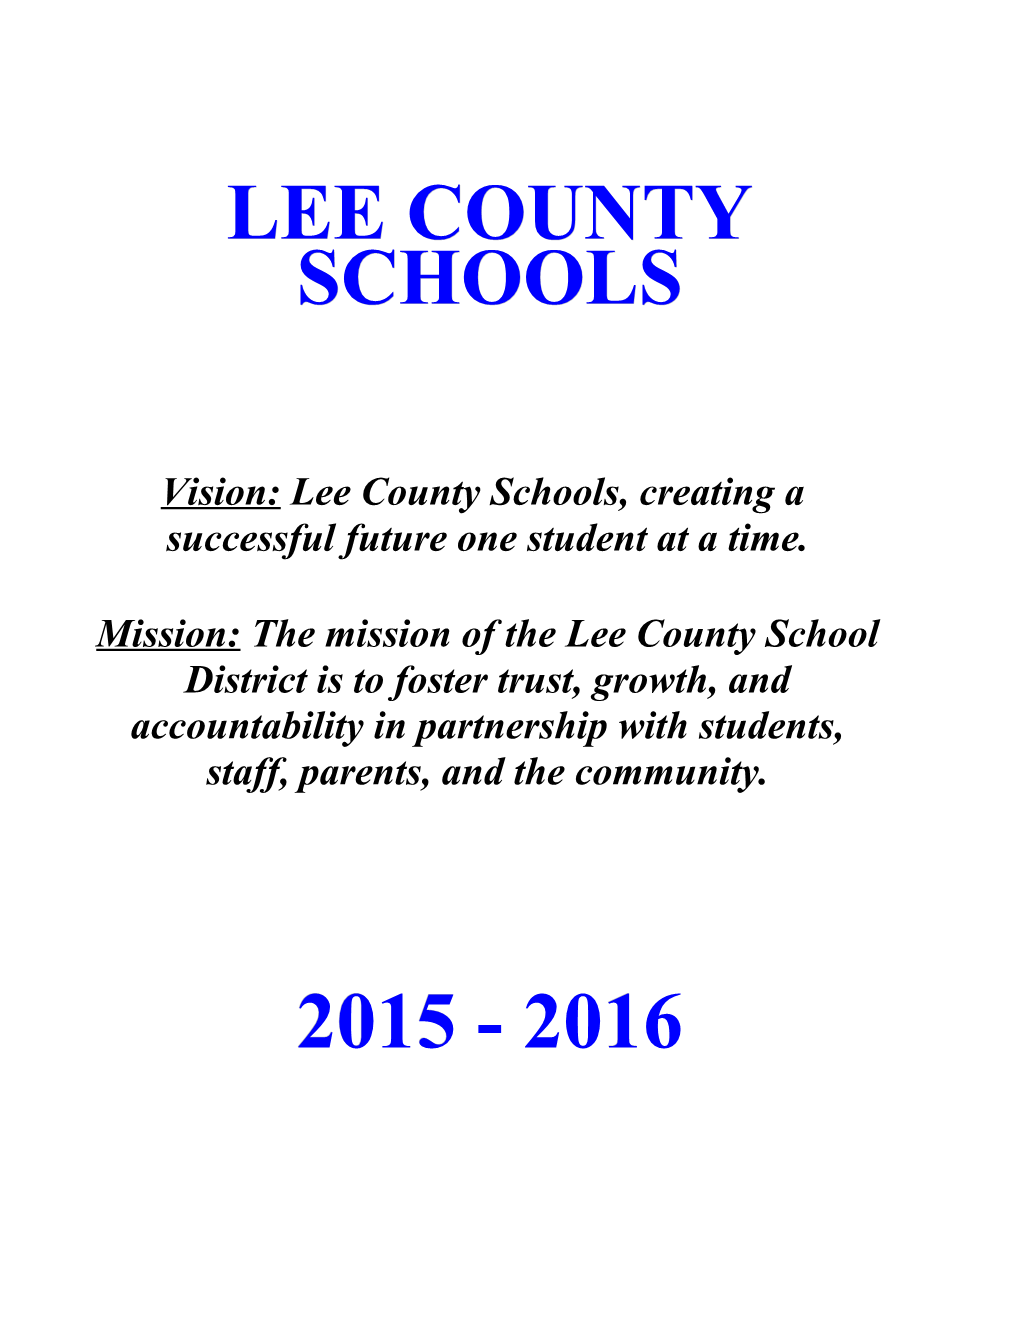 Vision: Lee County Schools, Creating A